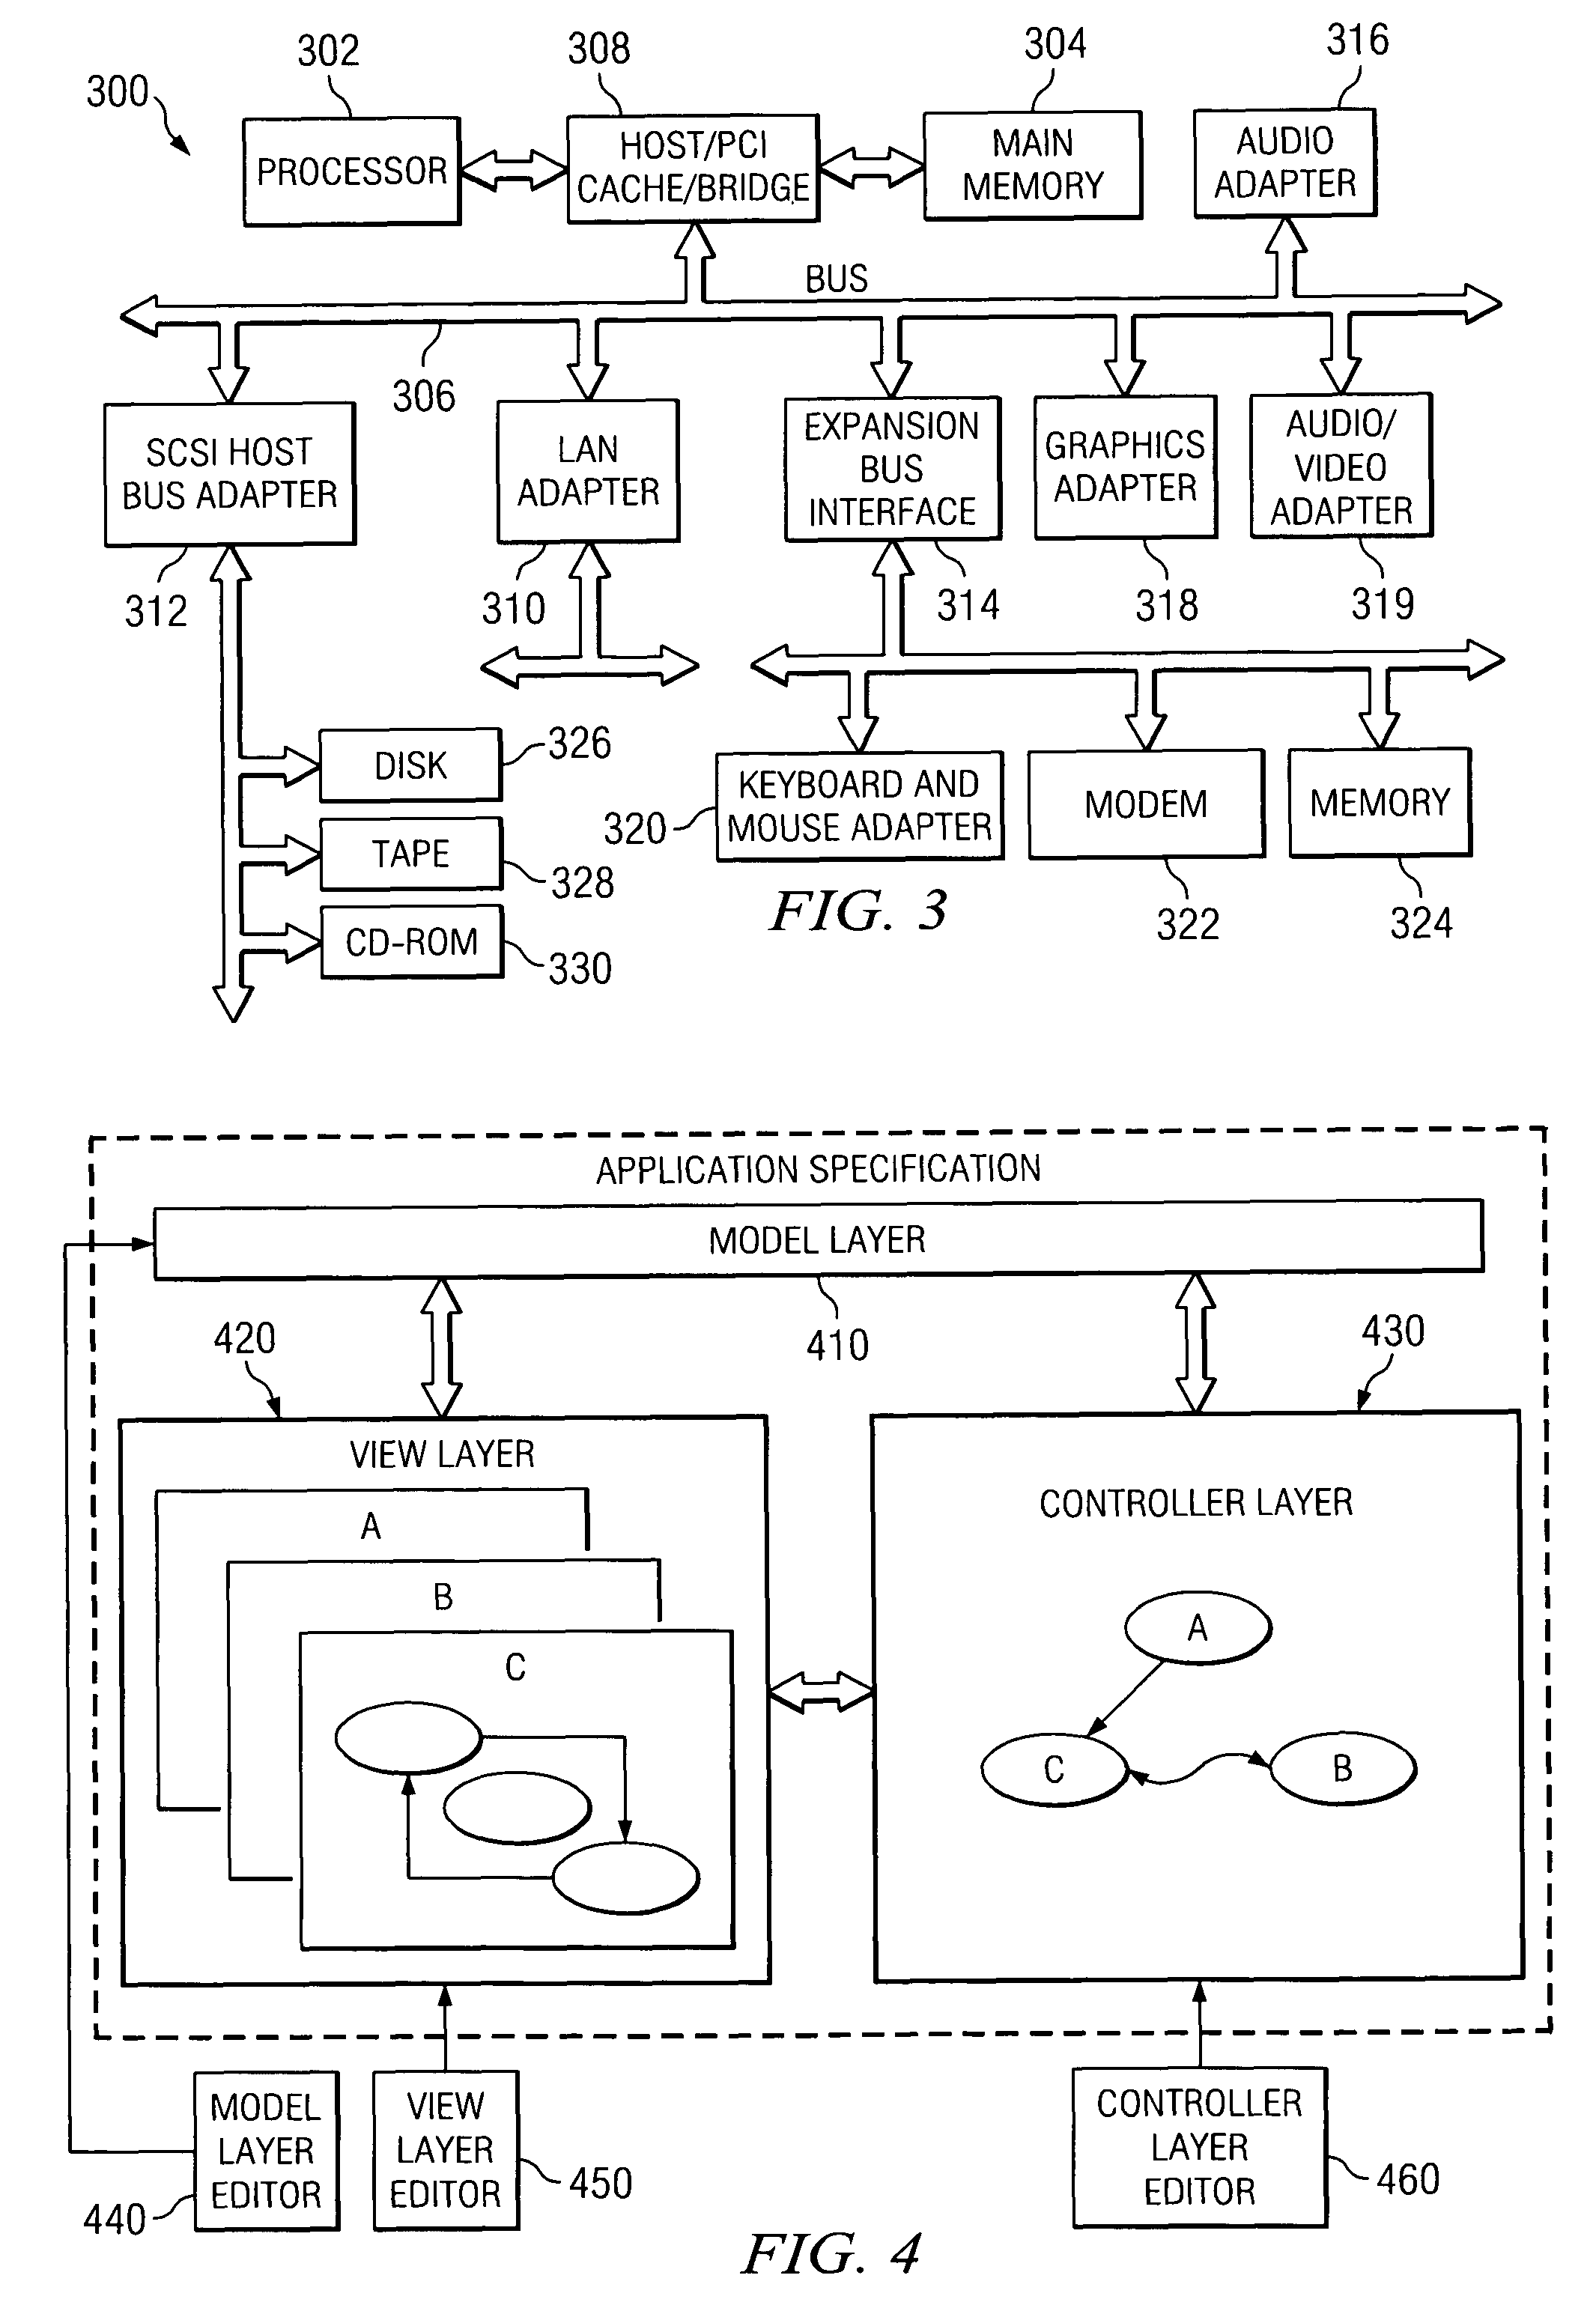 System and method for providing an embedded complete controller specification through explicit controller overlays